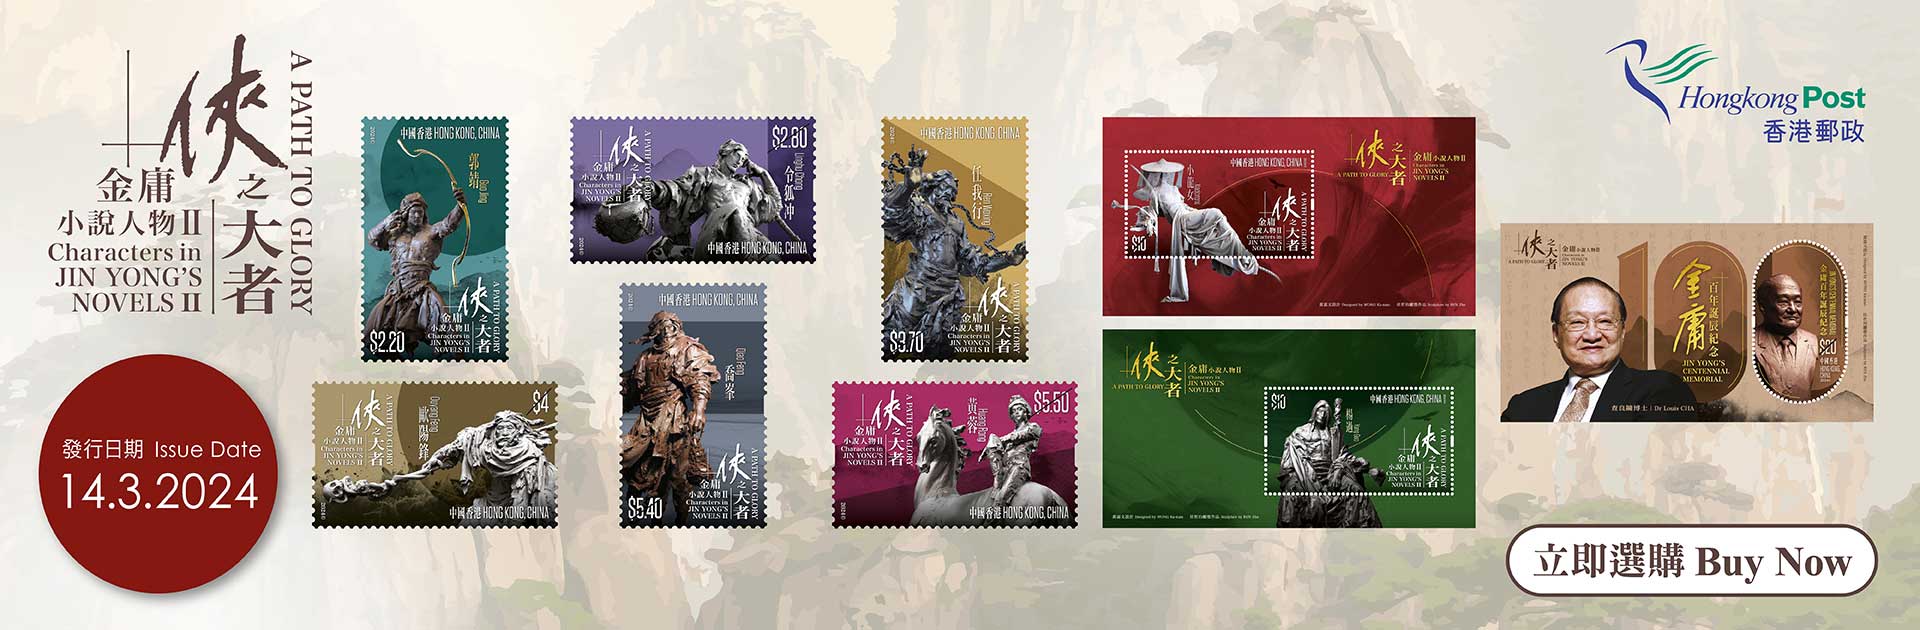 "Characters in Jin Yong's Novels II - A Path to Glory" stamp issue